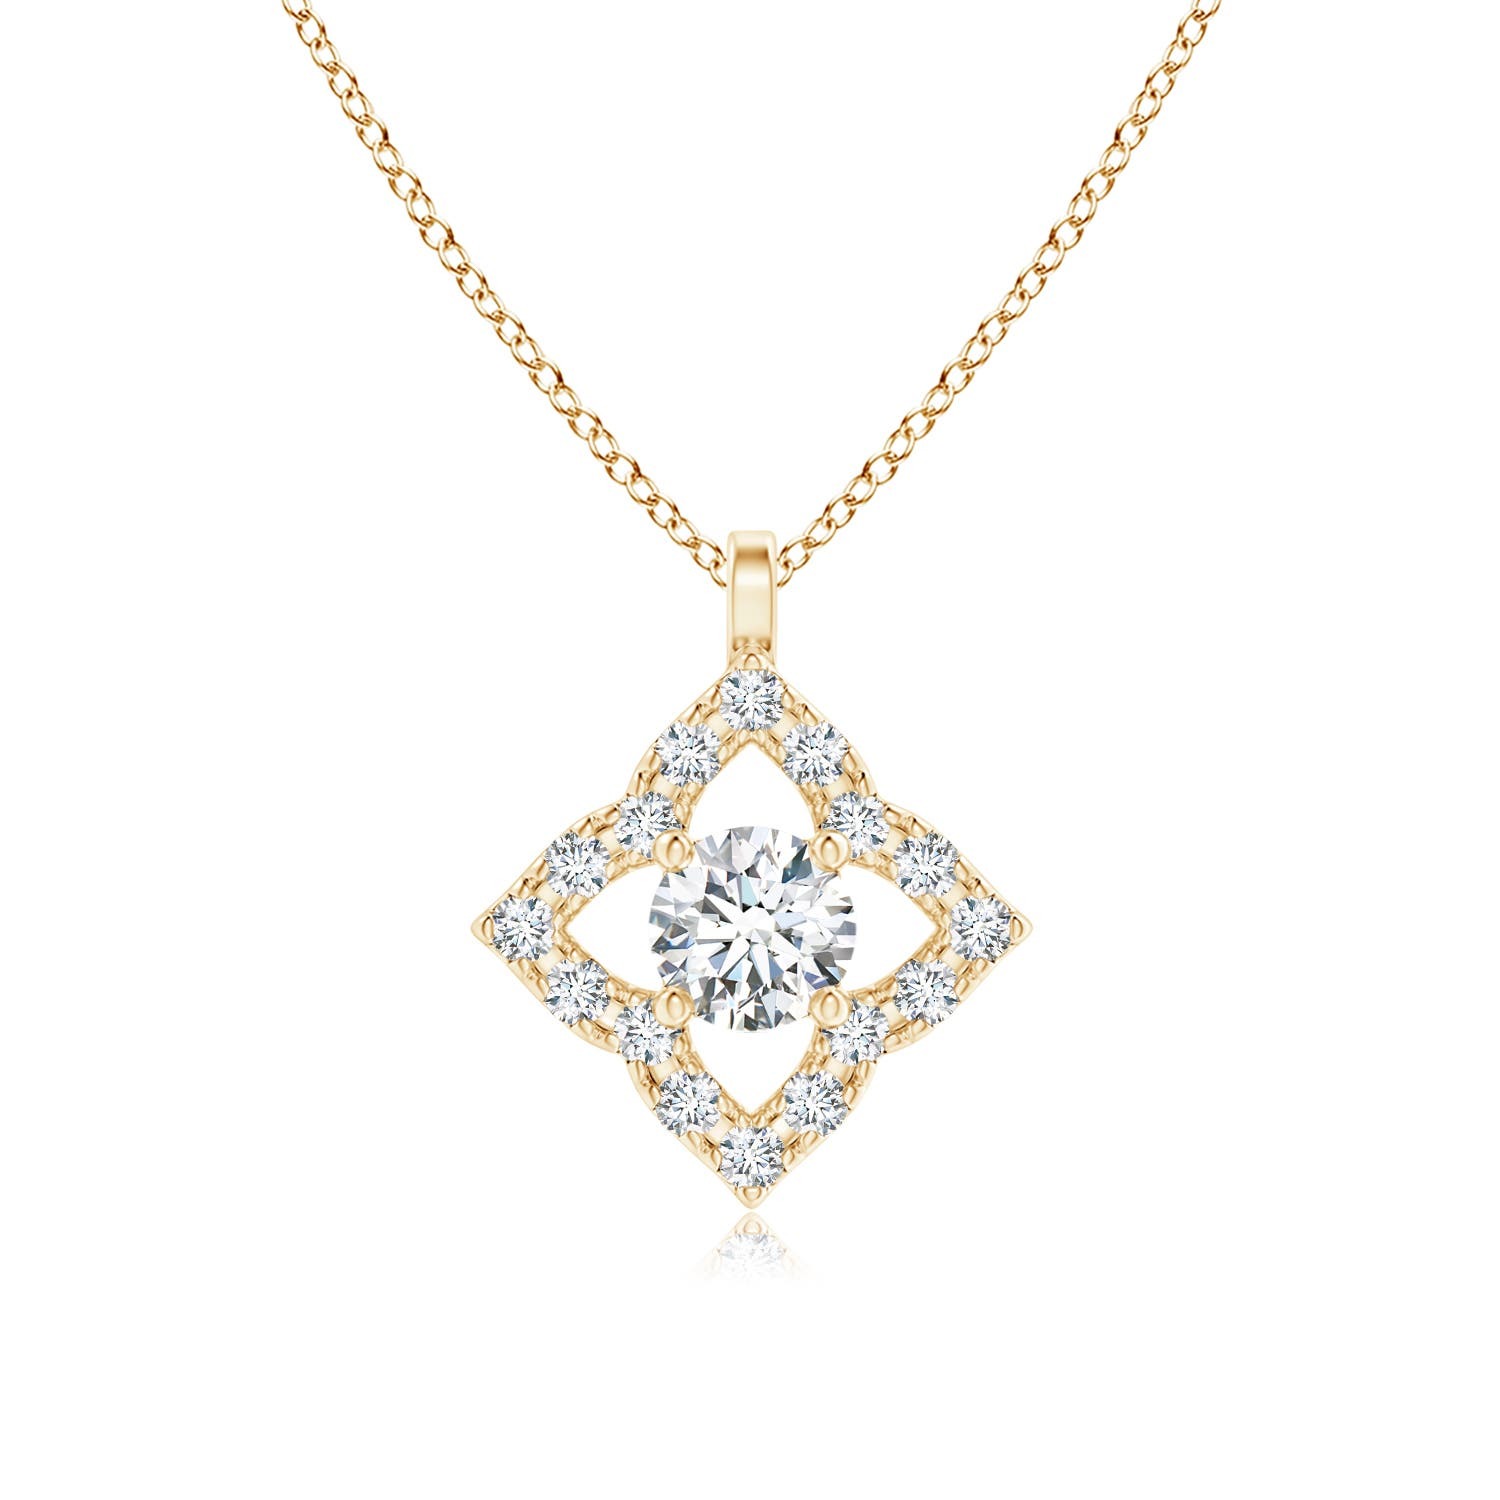 Primary image for ANGARA Lab-Grown 0.18 Ct Diamond Clover Pendant Necklace in 14K Solid Gold